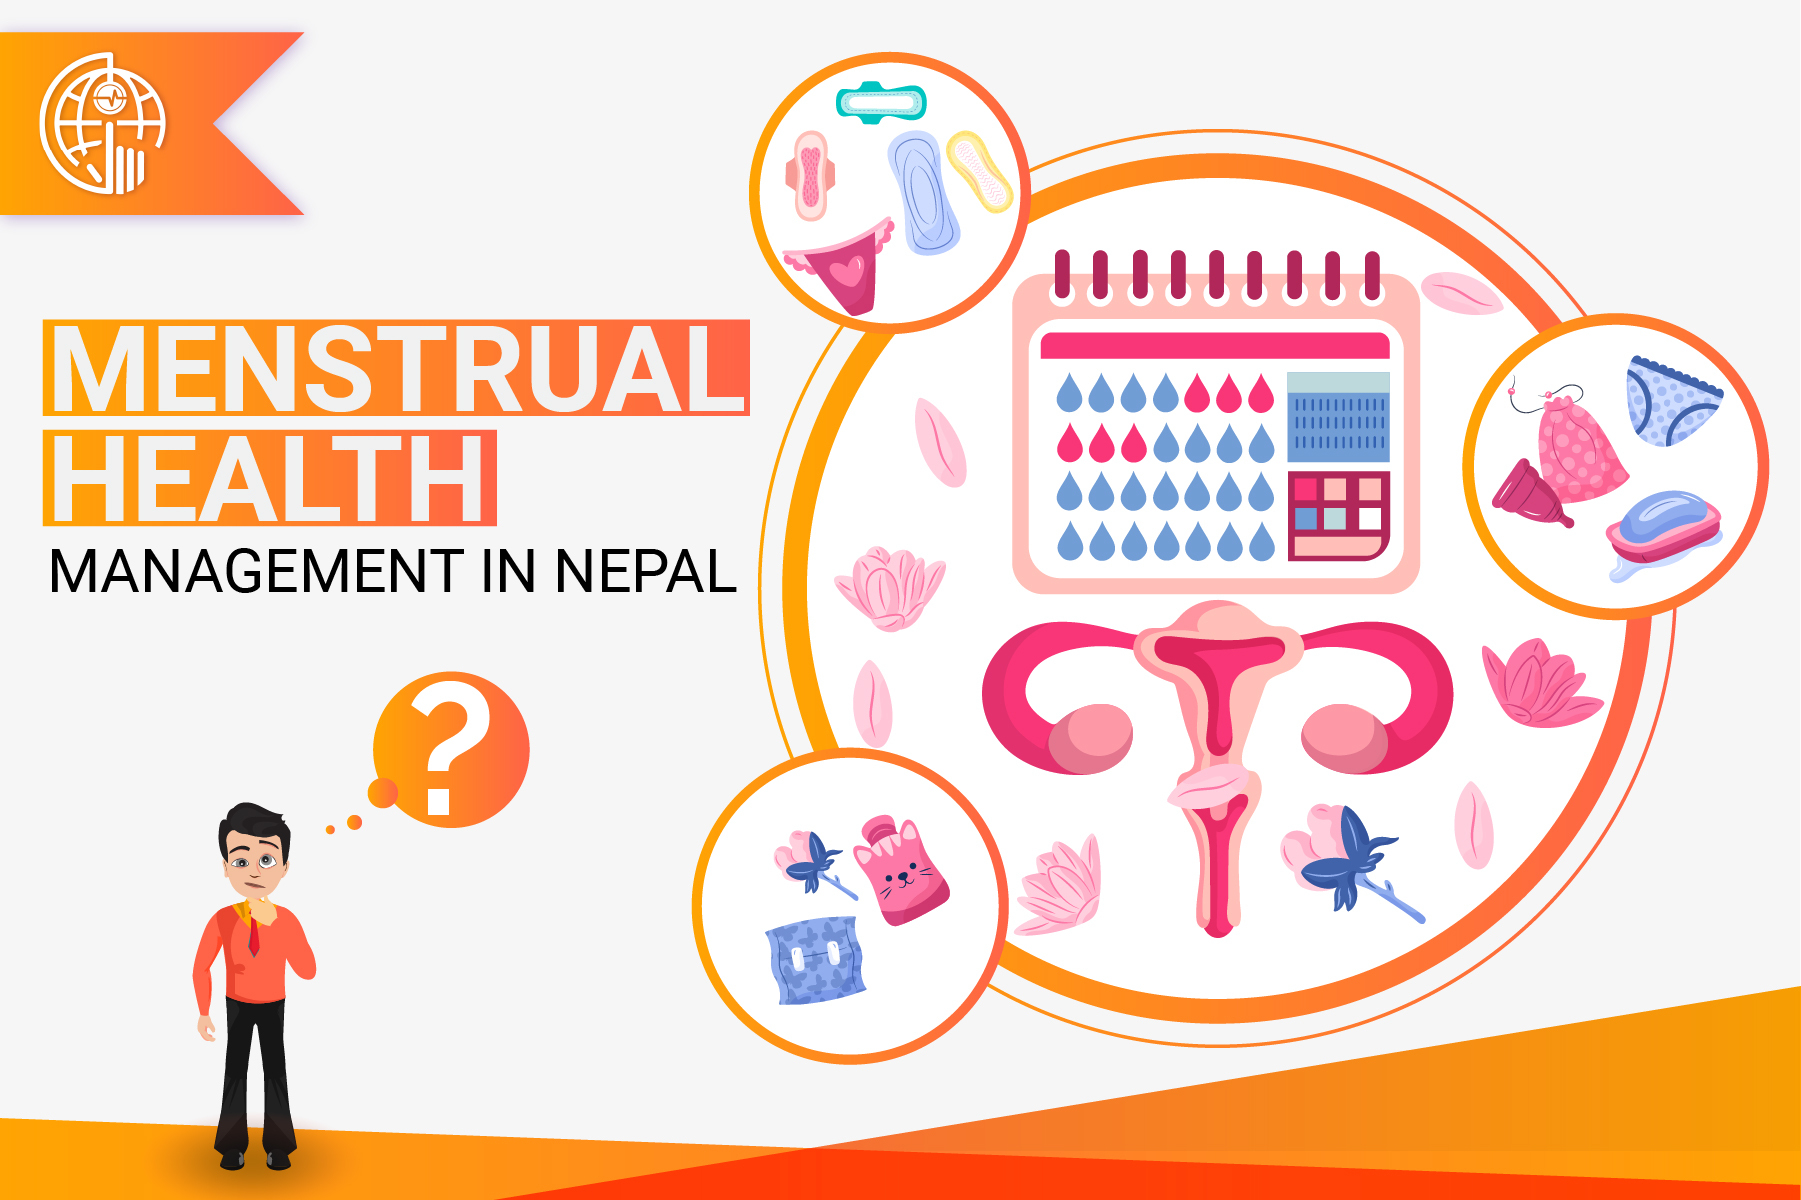 The Government of Nepal provides sanitary pads for free in government schools. However, this does not cater to the needs of other menstruators, what should the government do to ensure everyone has access?